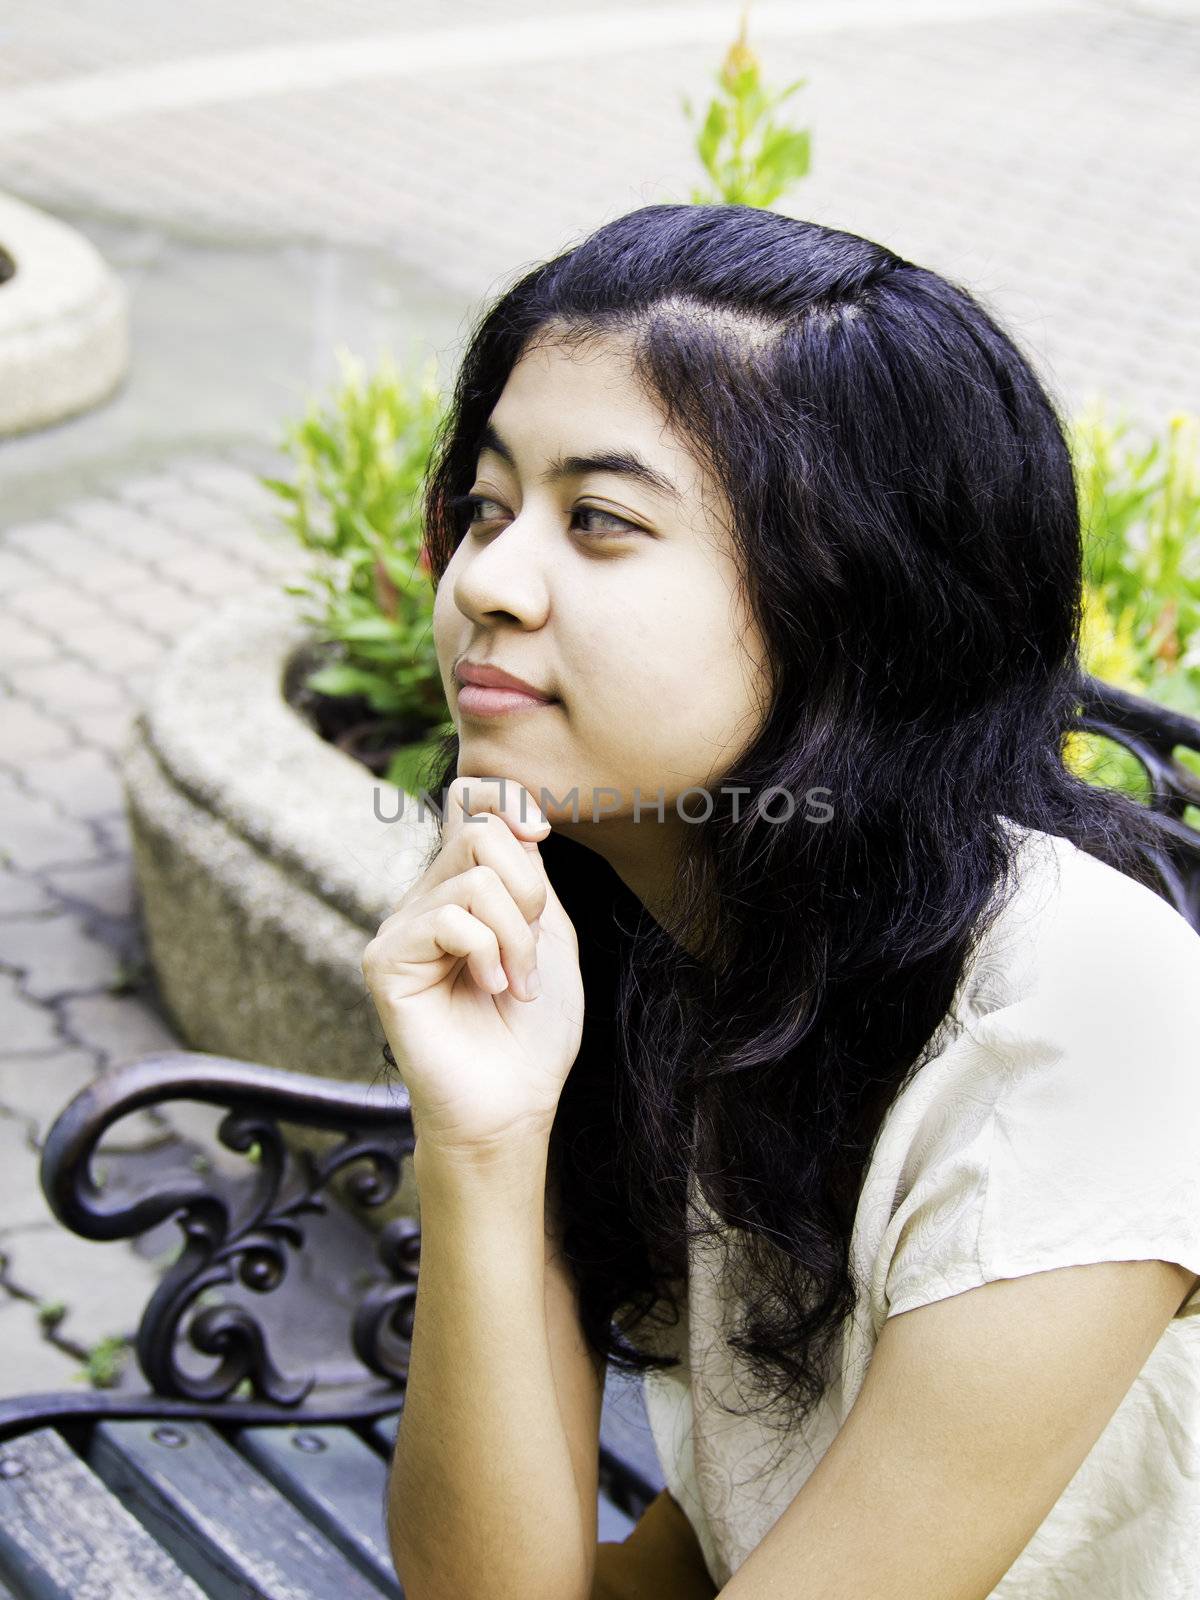 young girl thinking something at public park, outdoor